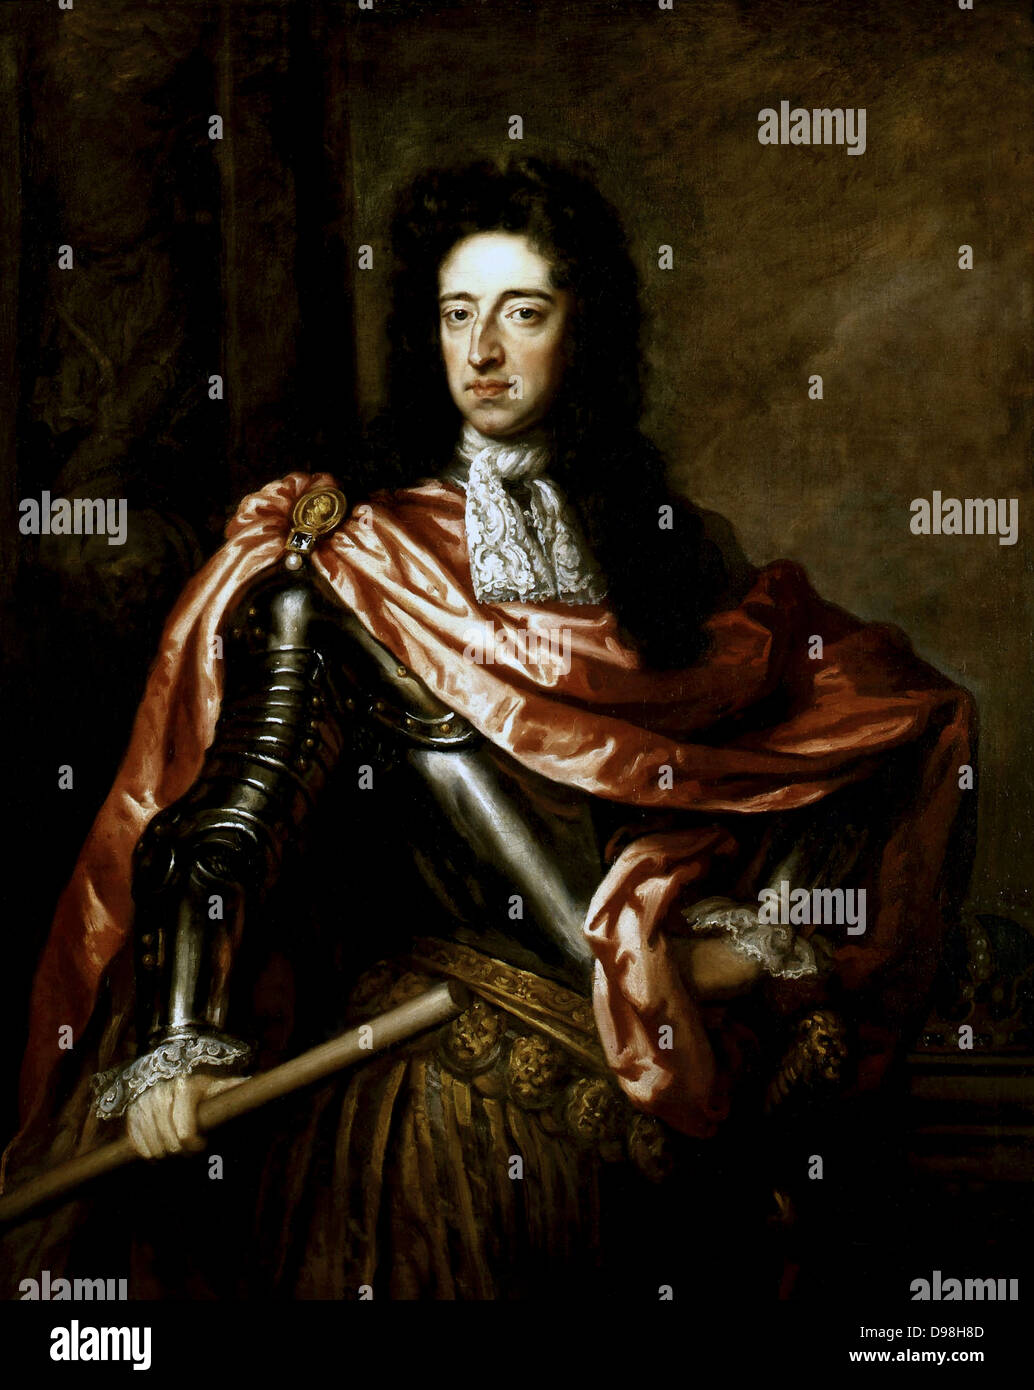 Le roi Guillaume III d'Angleterre, (1650-1702) Banque D'Images